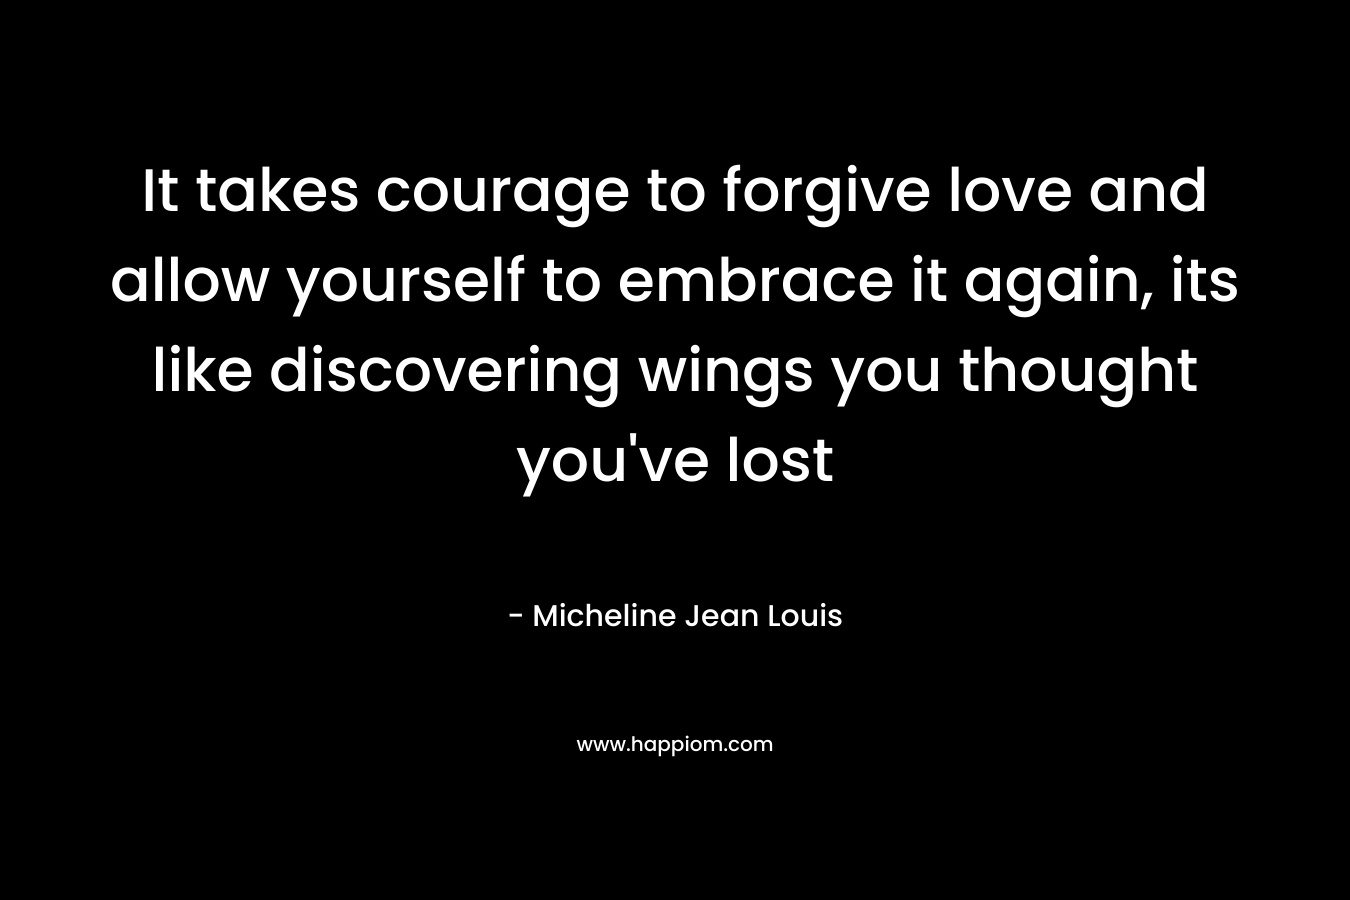 It takes courage to forgive love and allow yourself to embrace it again, its like discovering wings you thought you've lost